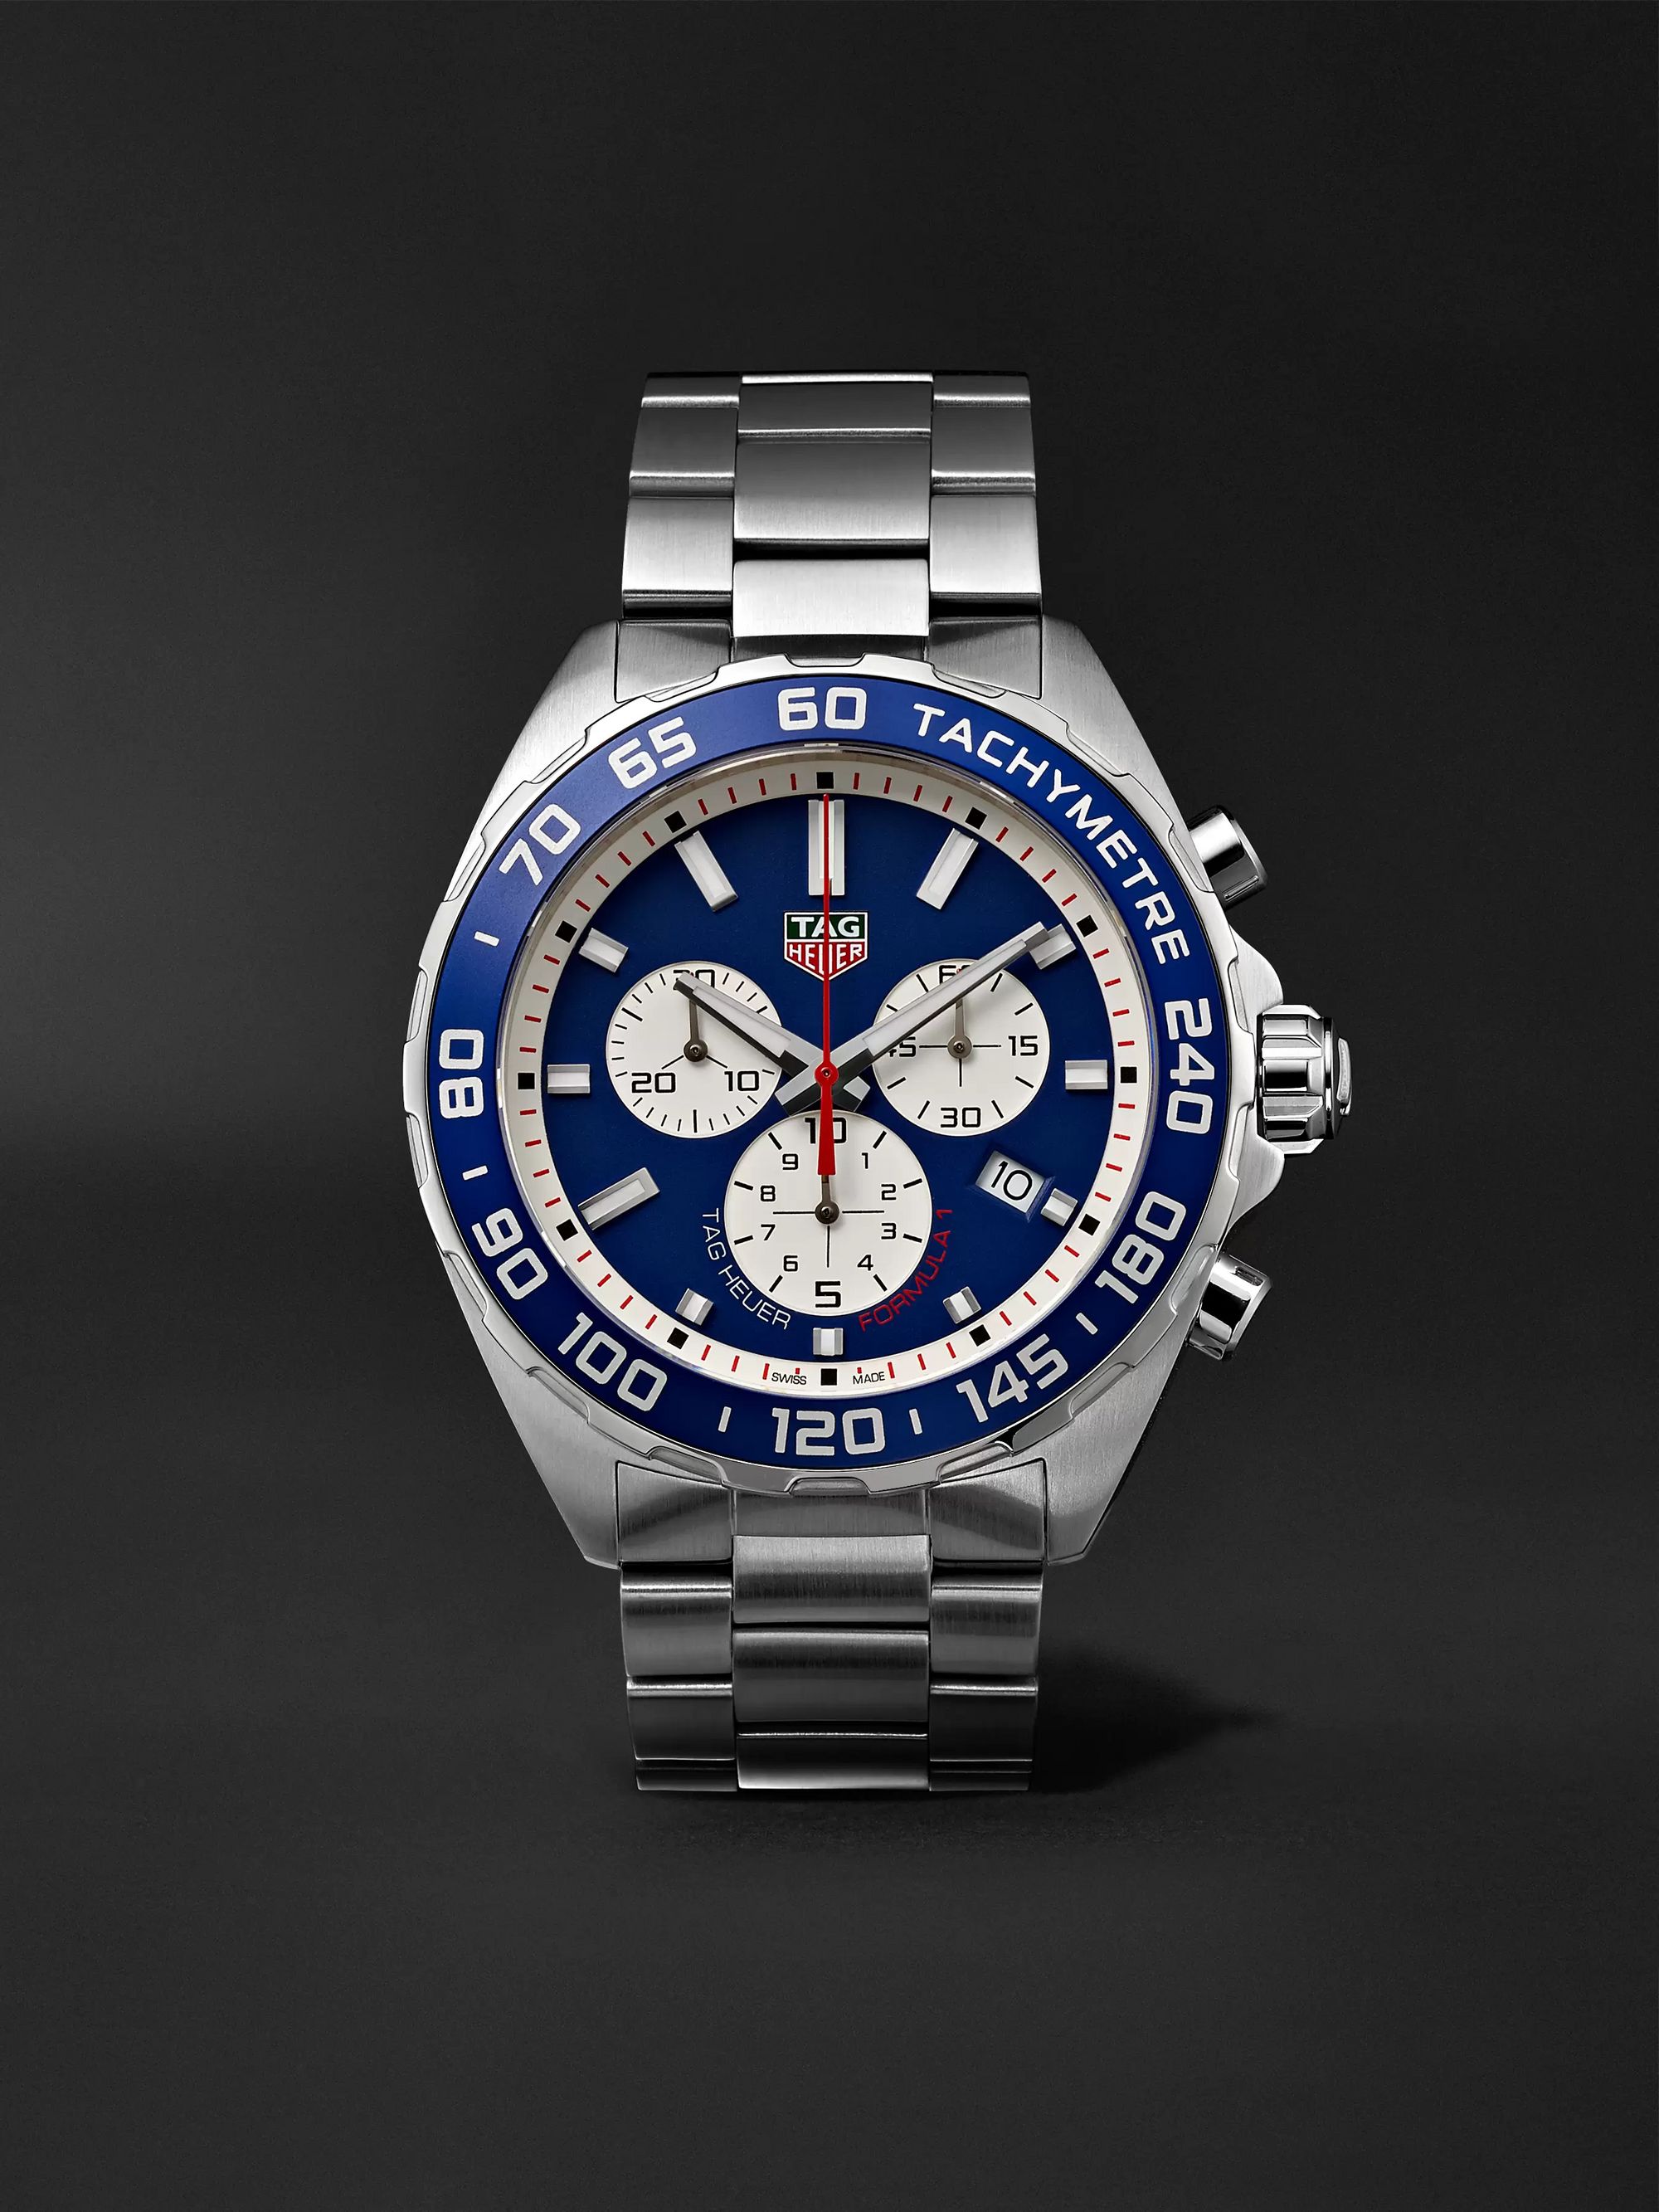 TAG Heuer Formula 1 Chronograph 43mm Stainless Steel Watch, Ref. No. CAZ1018.BA0842